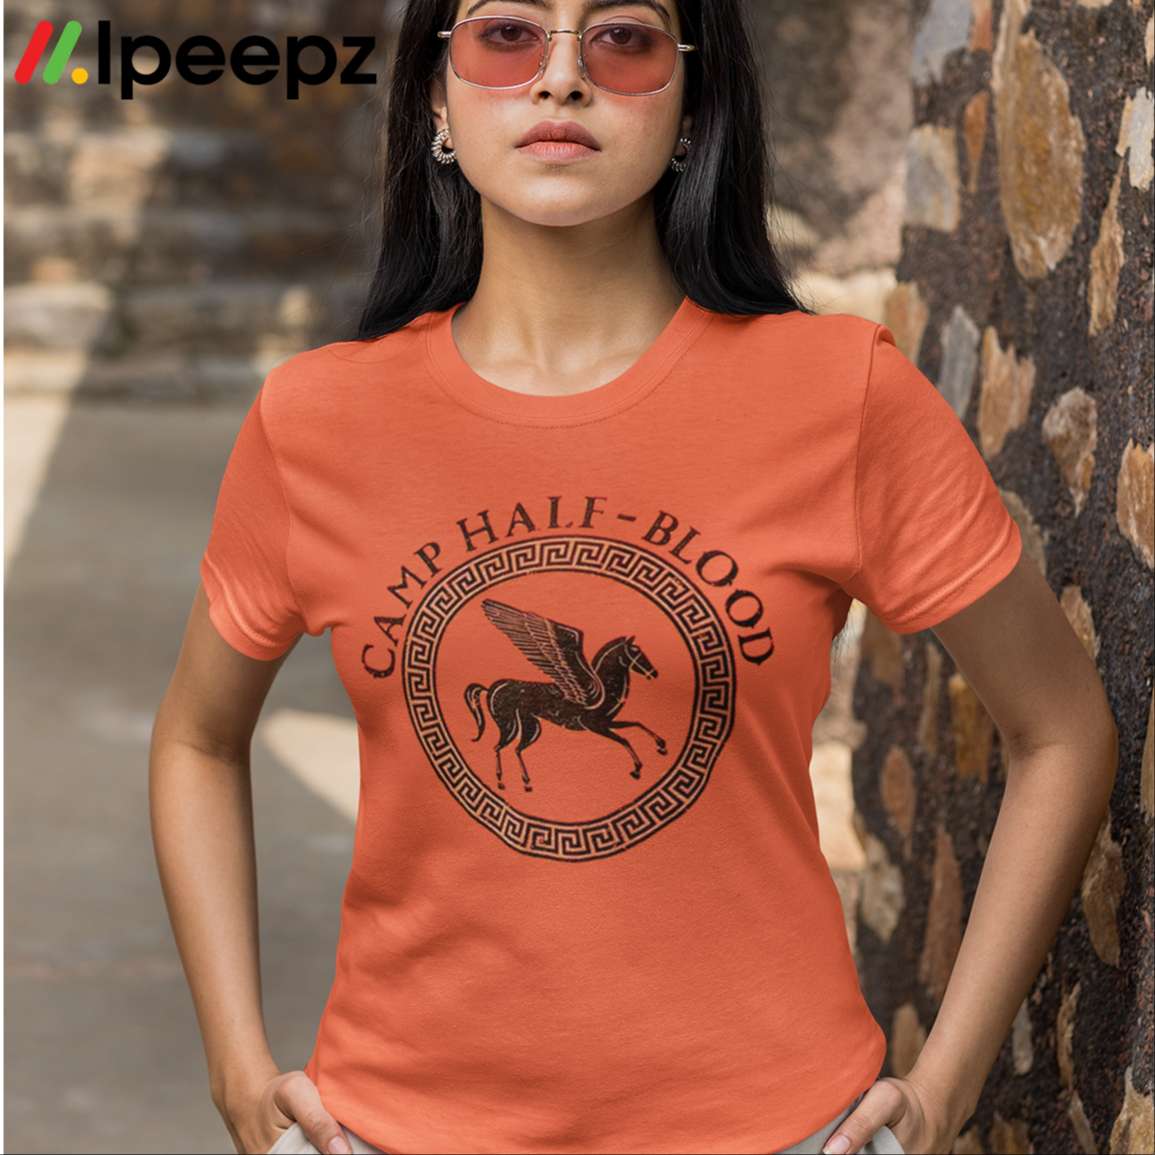 Camp Half Blood T-shirt Percy Jackson Halloween Costume women Fitted Ladies  size Shirts S-2XL